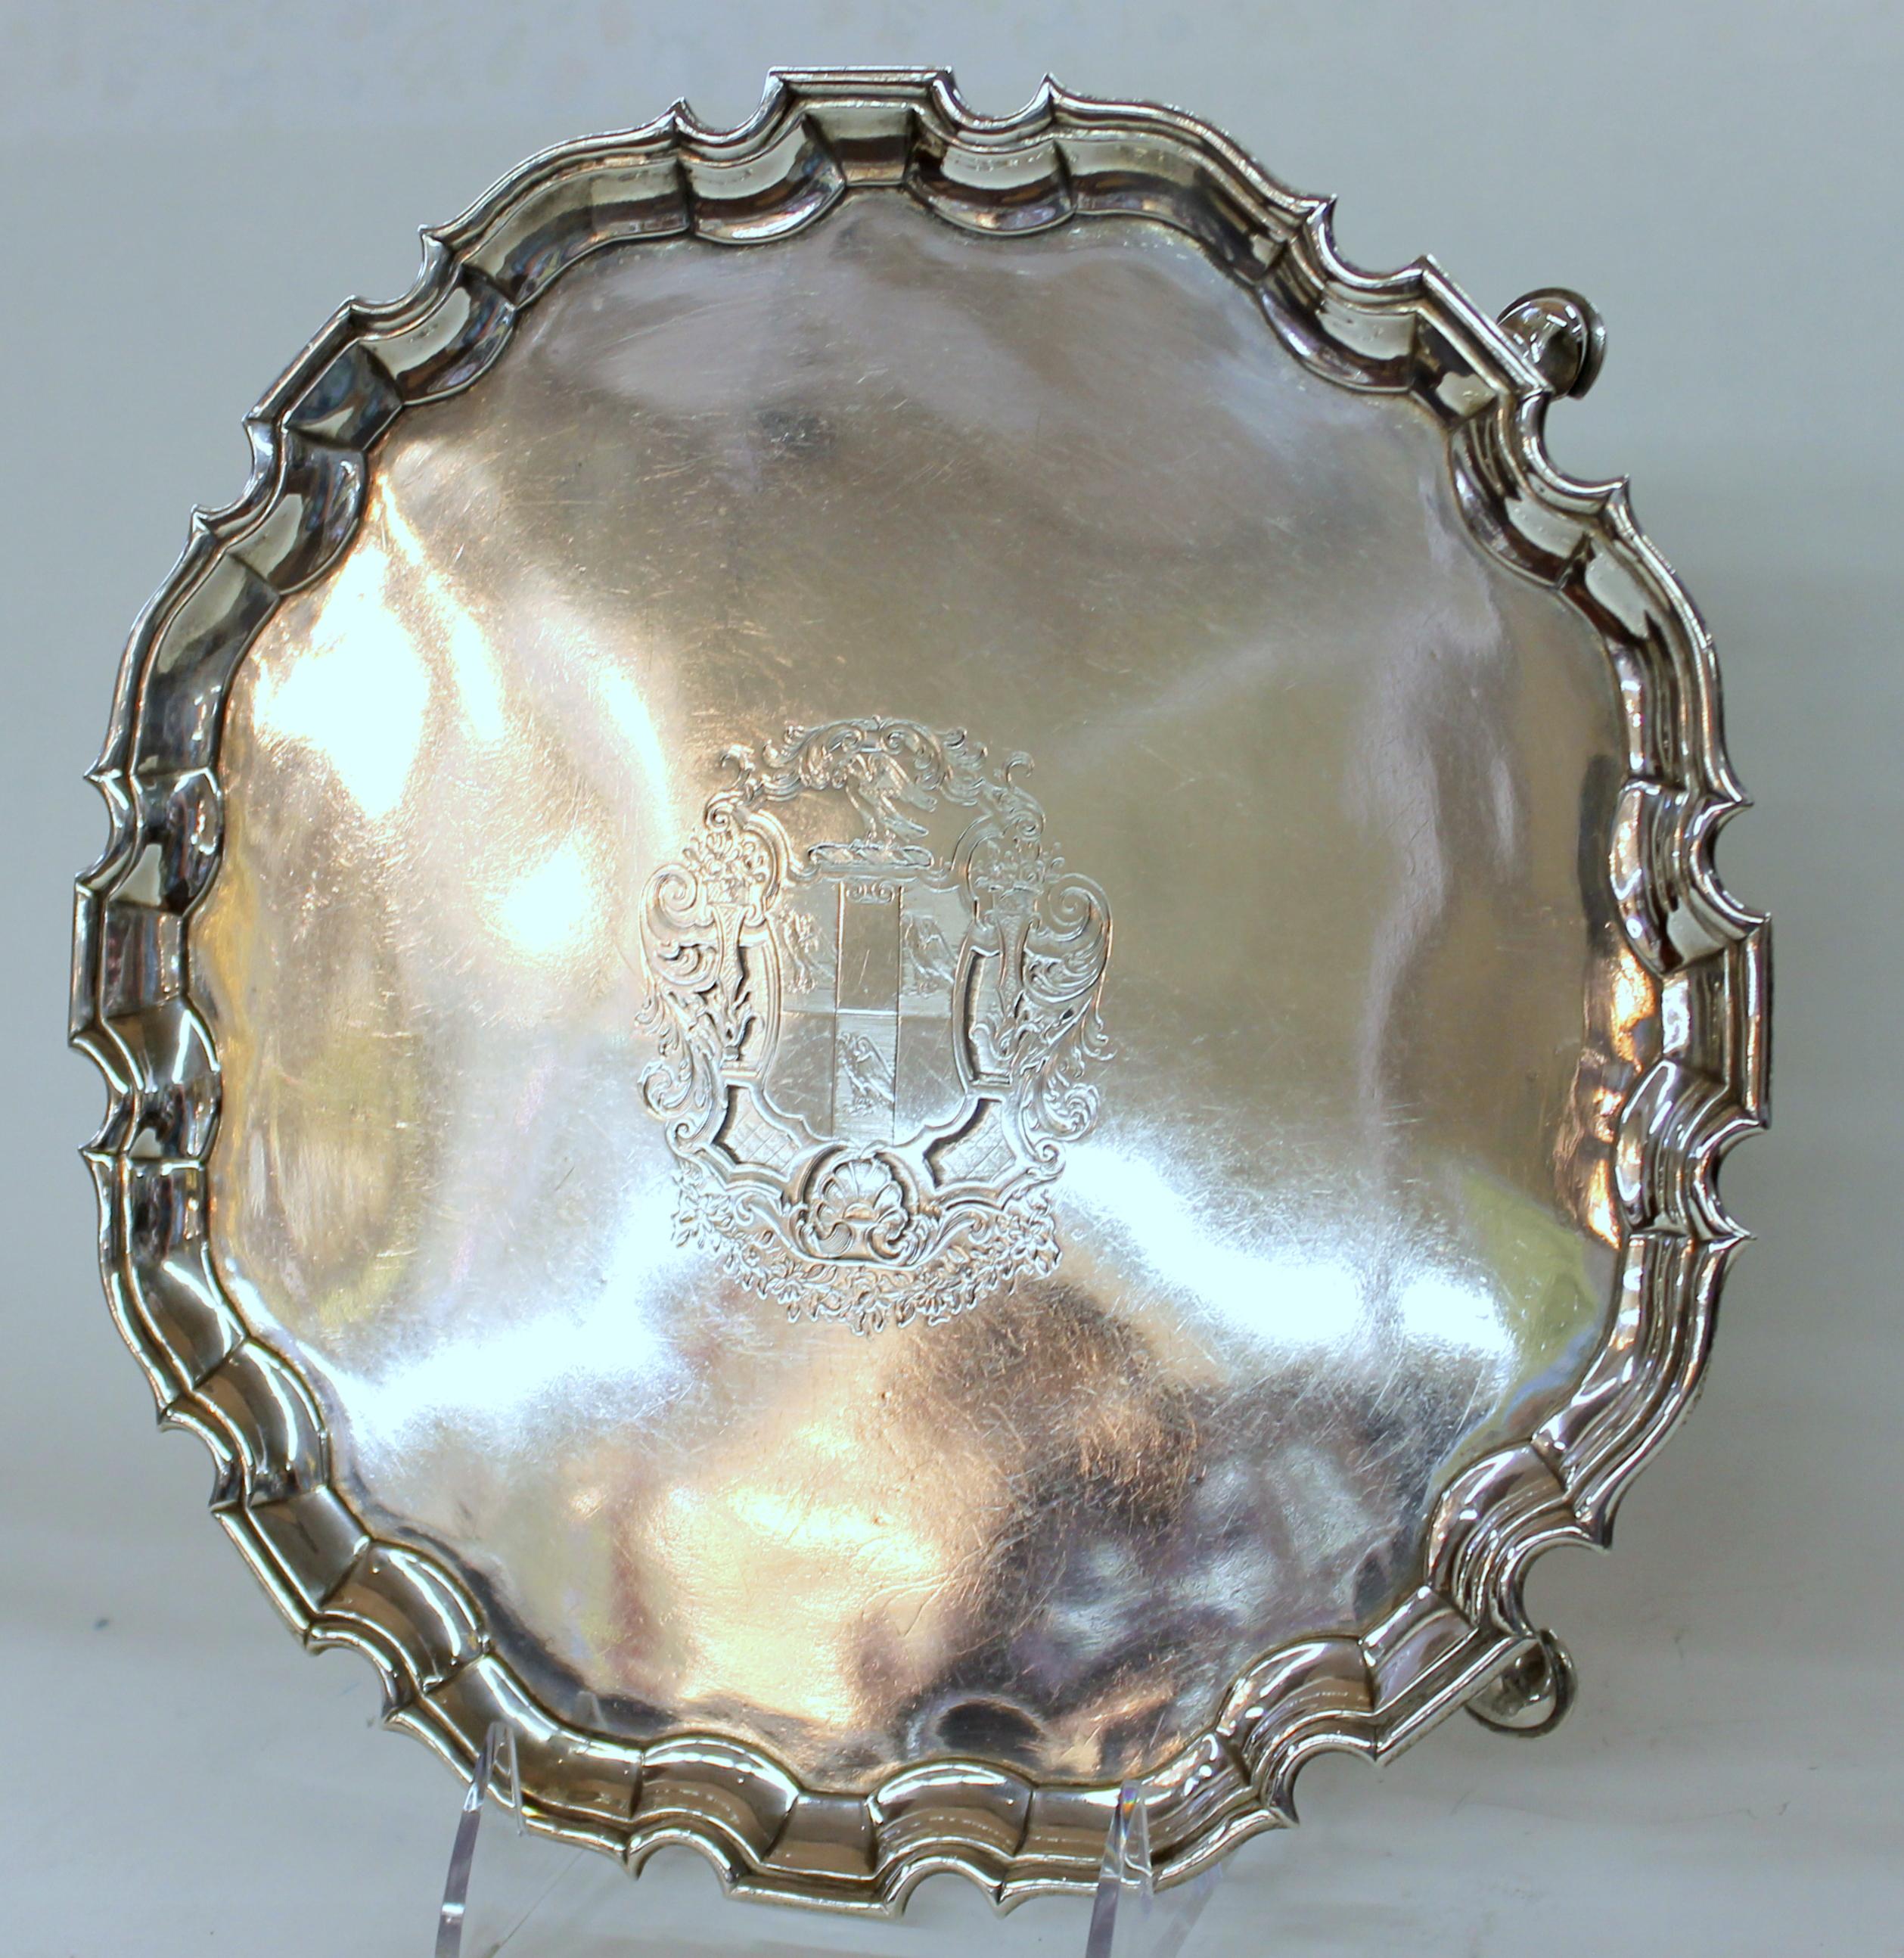 Exquisite heavyweight hallmarked sterling George III Chippendale style salver with exceptional Hand-engraved armorial crest; piecrust edge; fabulous ball and claw feet.
Hallmarks for London, 1798-1799, and Maker's Marks for George